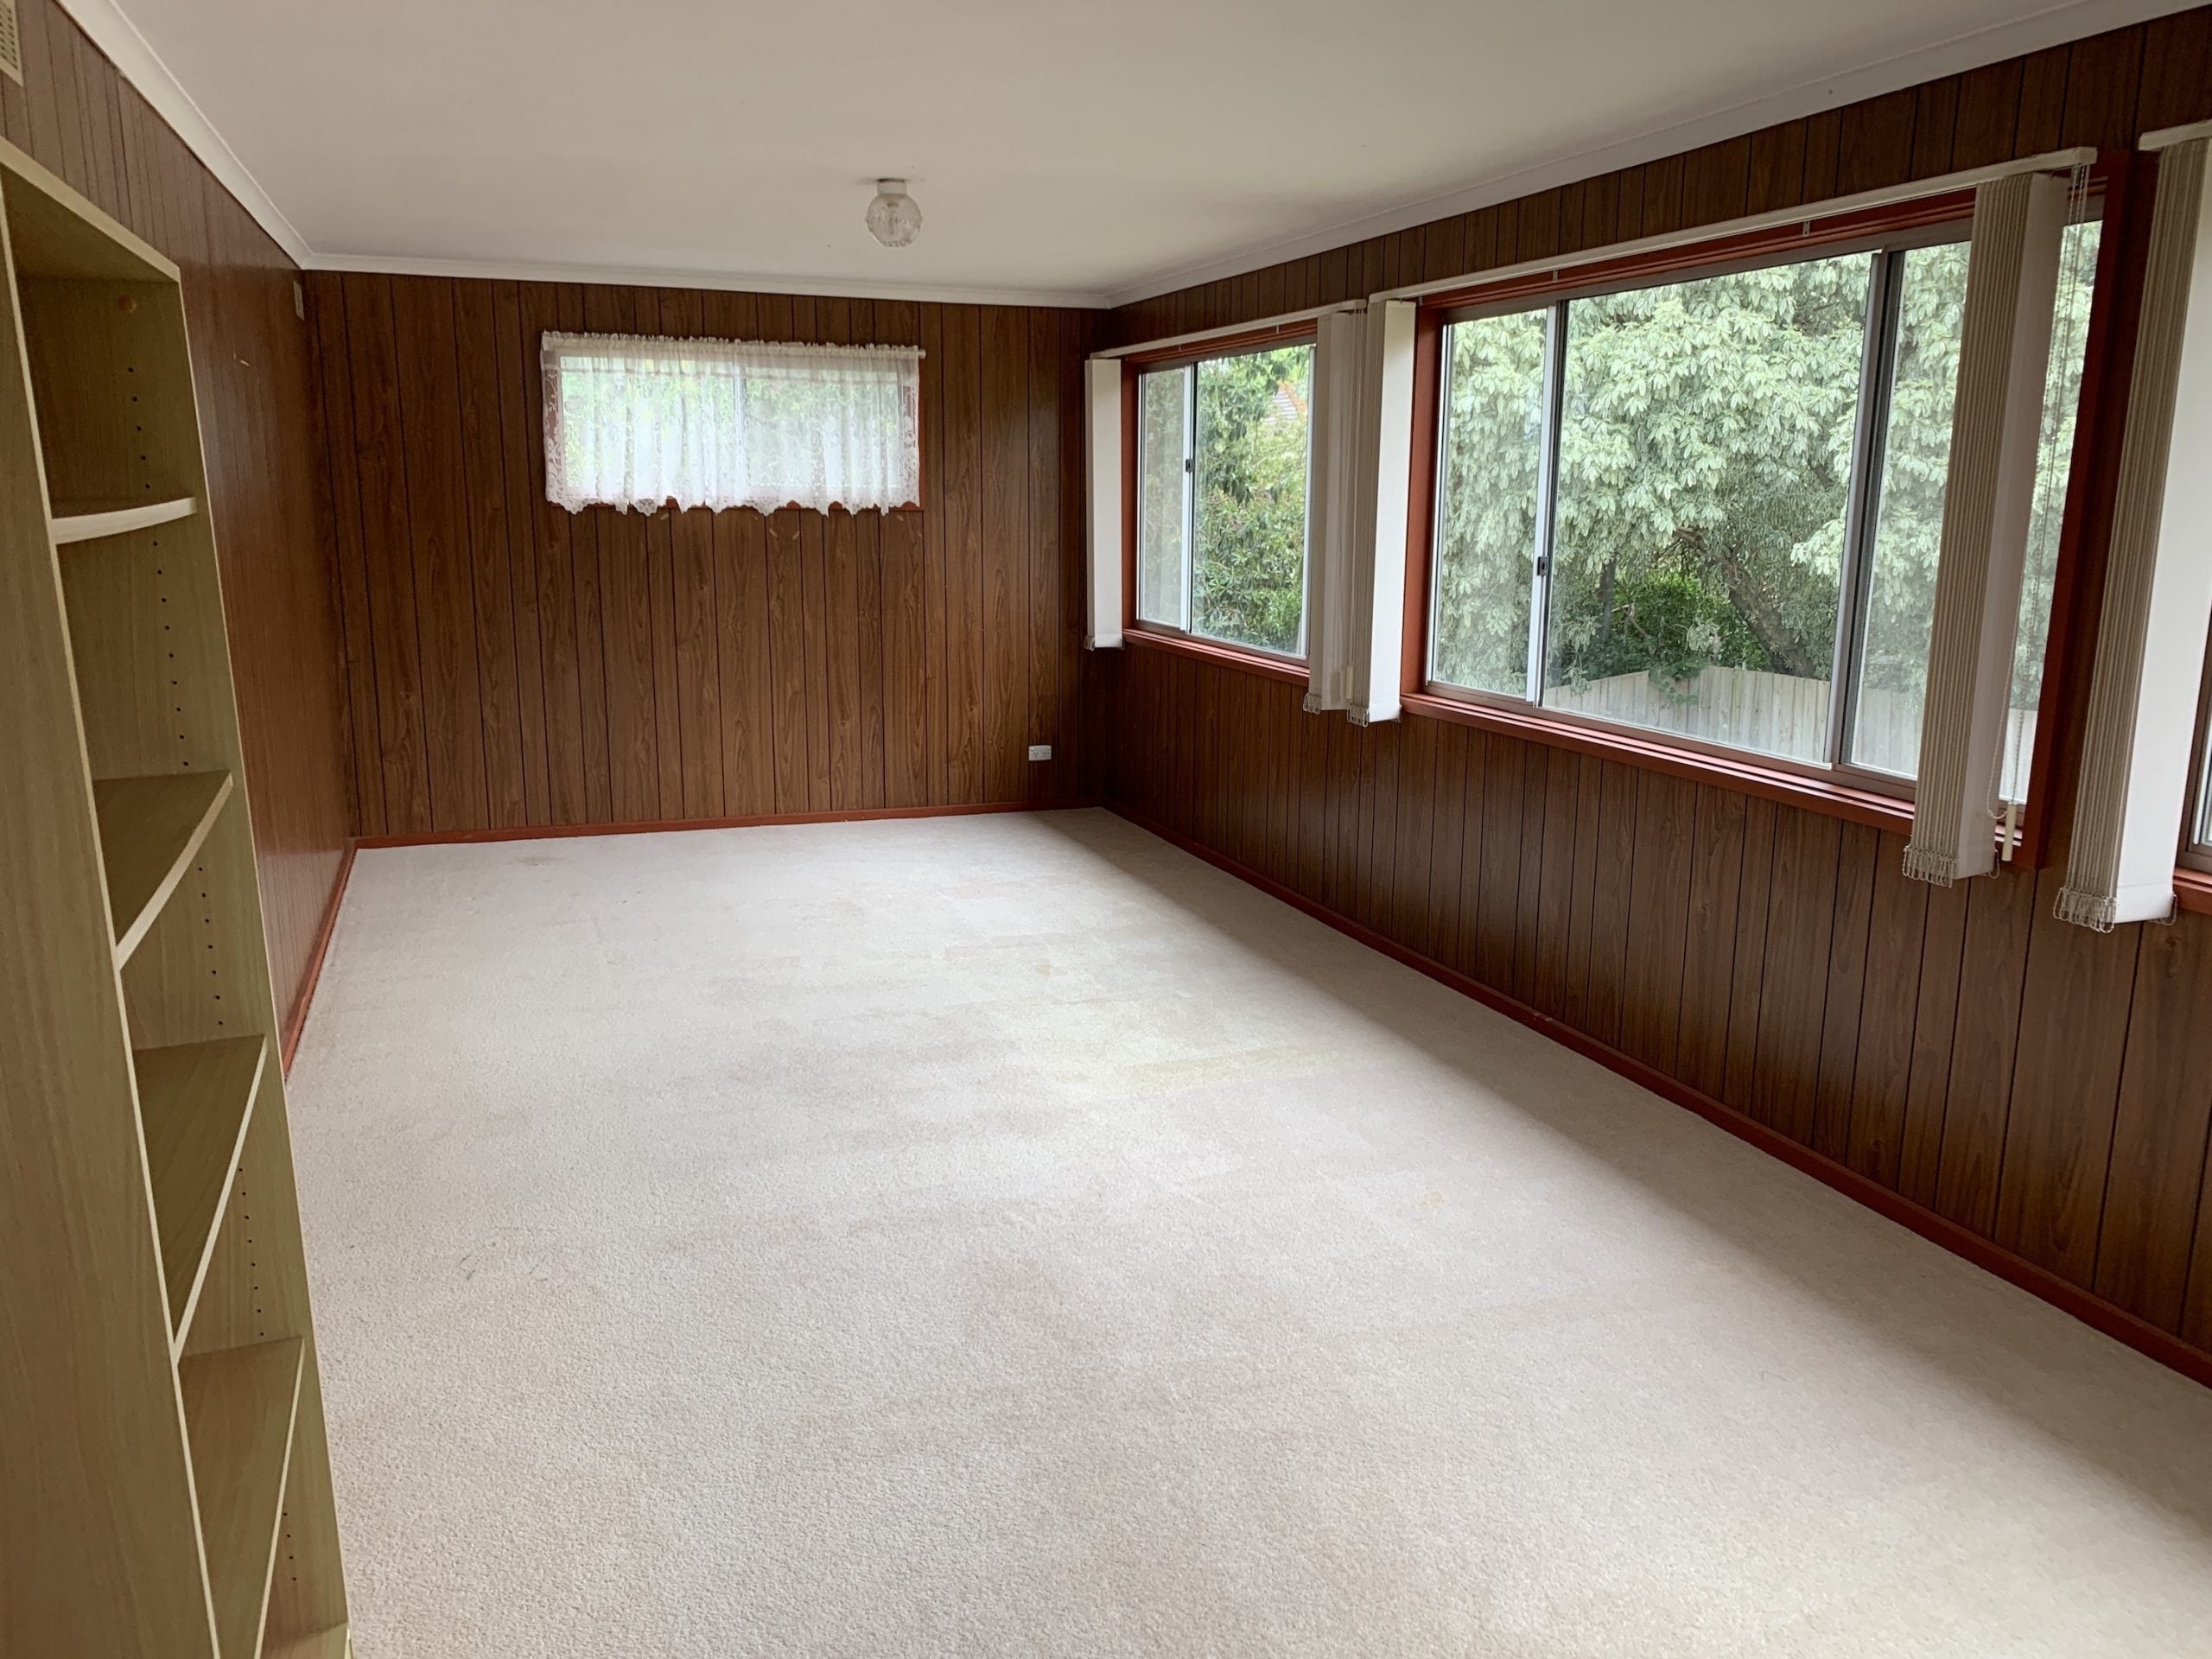 Large and empty living room well lit from windows